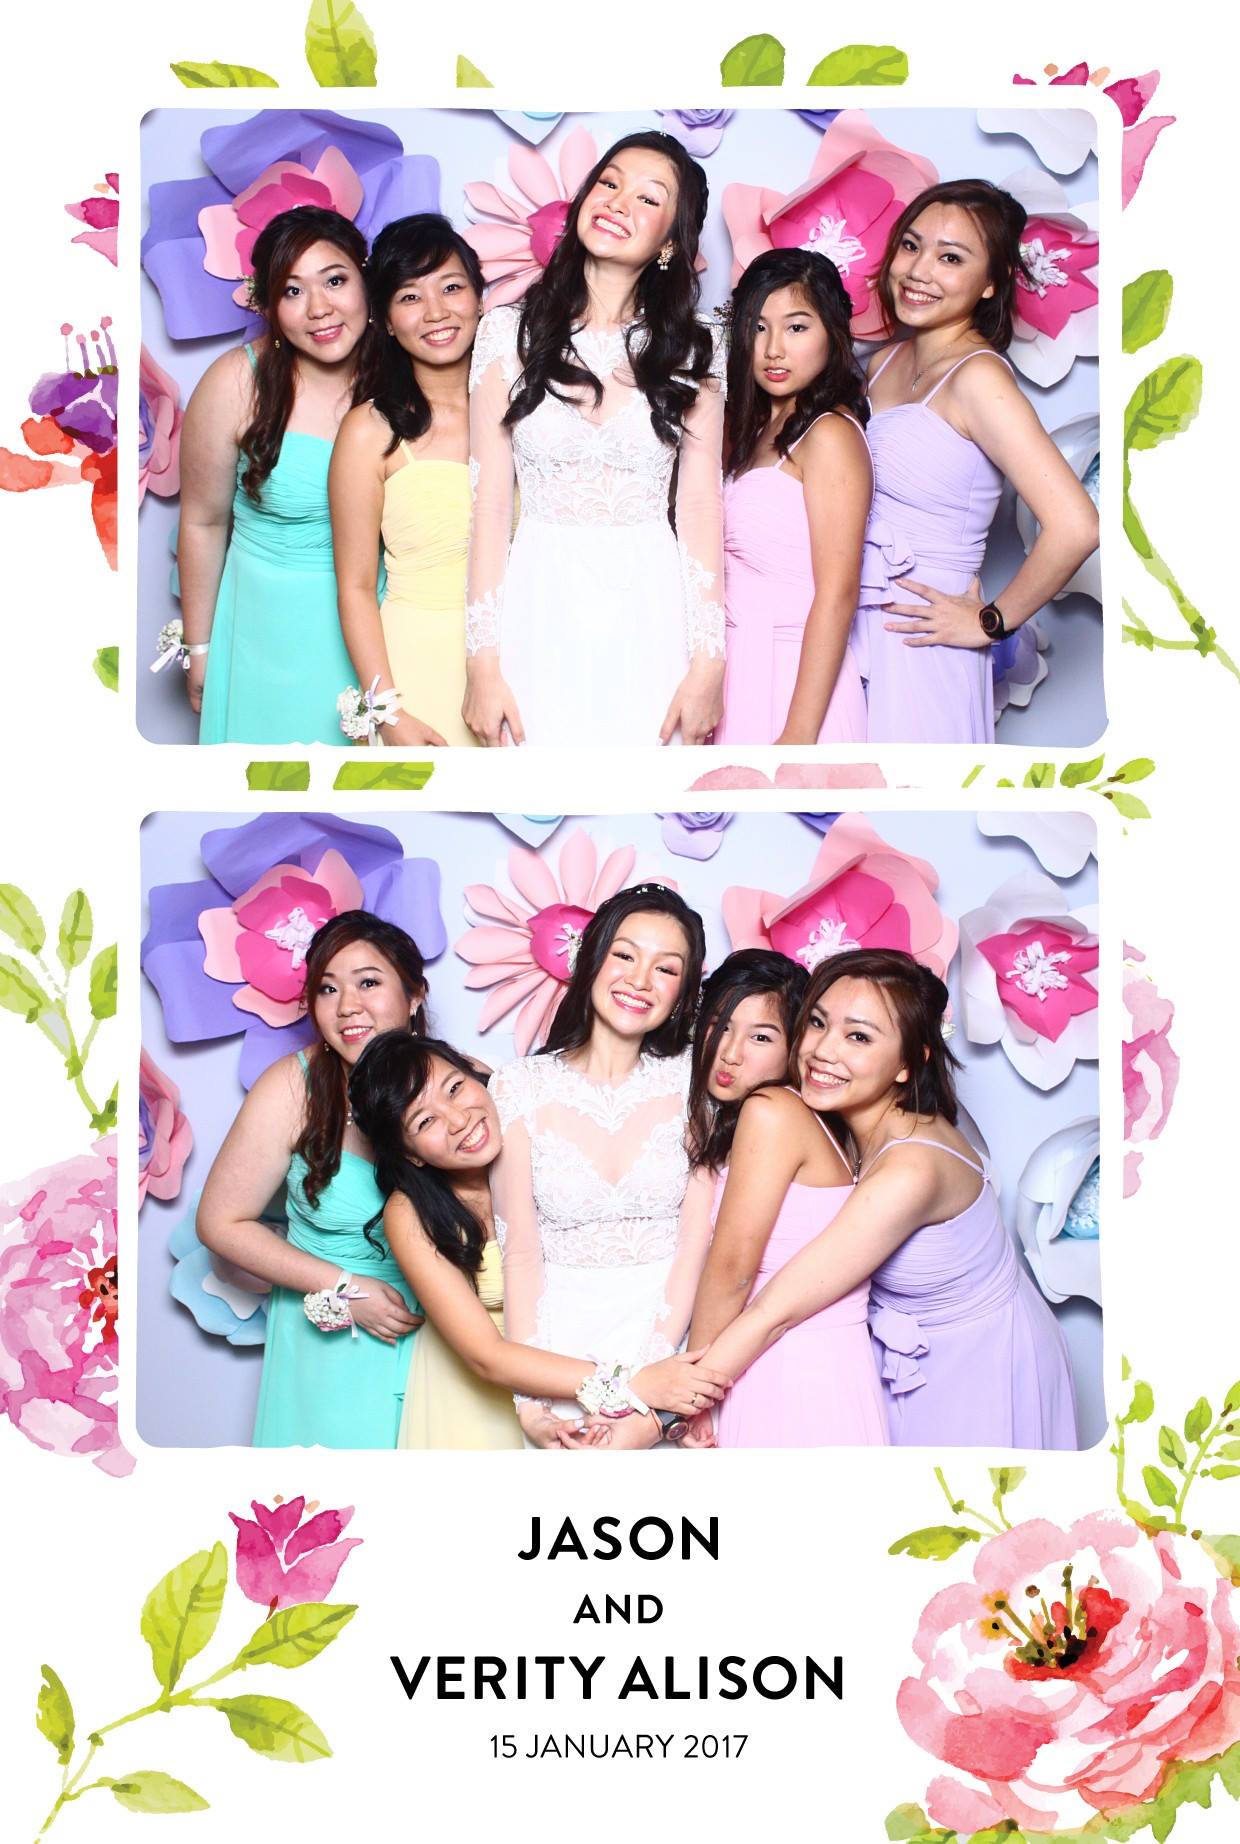 Wedding Instant Photo Booth Singapore | Vivid with Love